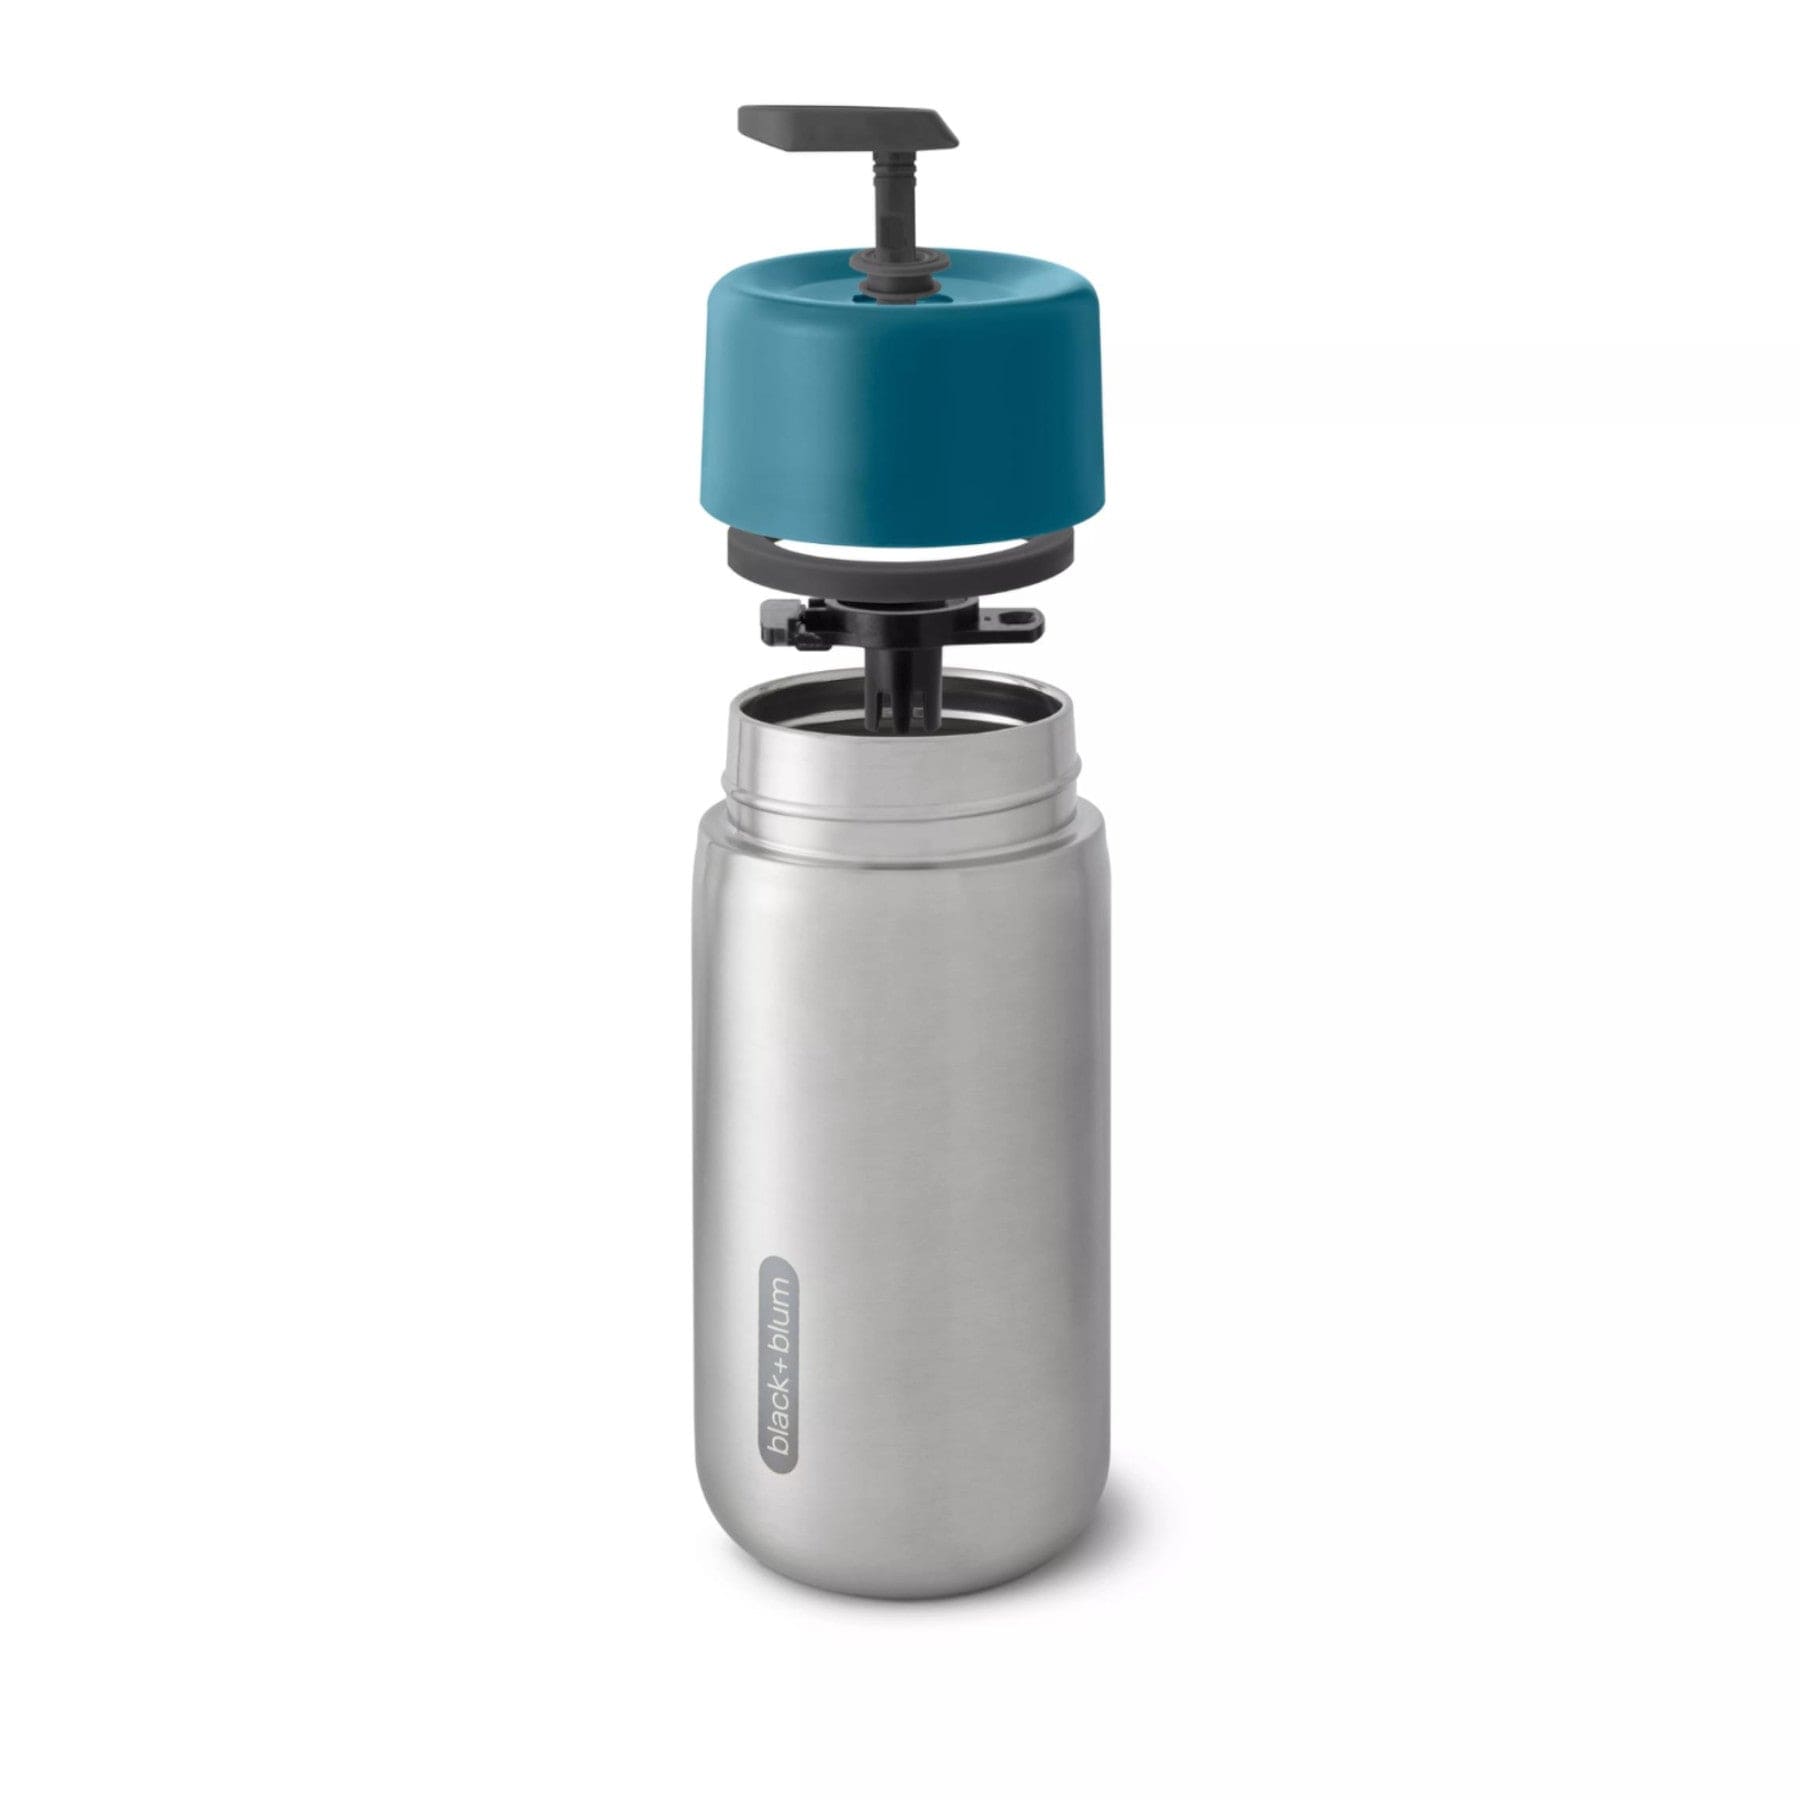 Stainless steel manual coffee grinder with adjustable ceramic burrs and blue crank handle